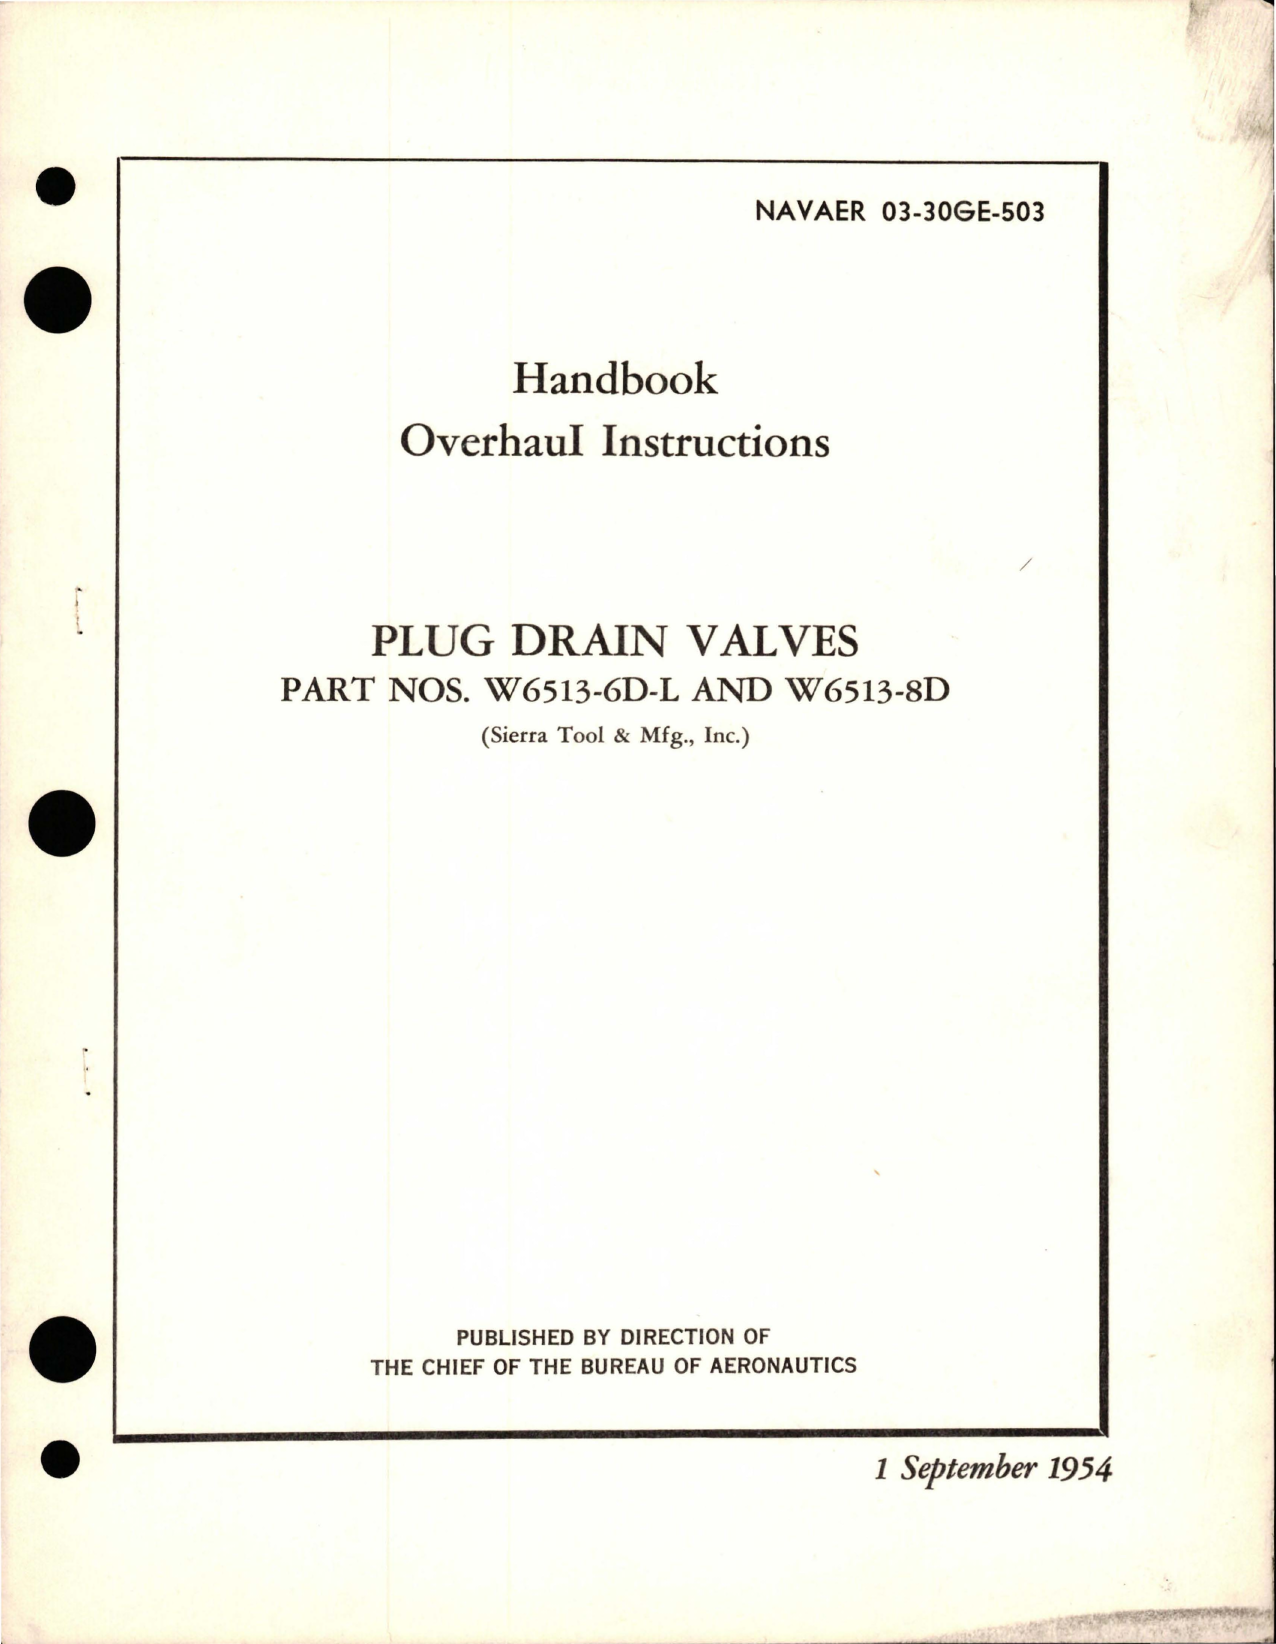 Sample page 1 from AirCorps Library document: Overhaul Instructions for Plug Drain Valves - Parts W6513-6D-L and W6513-8D 